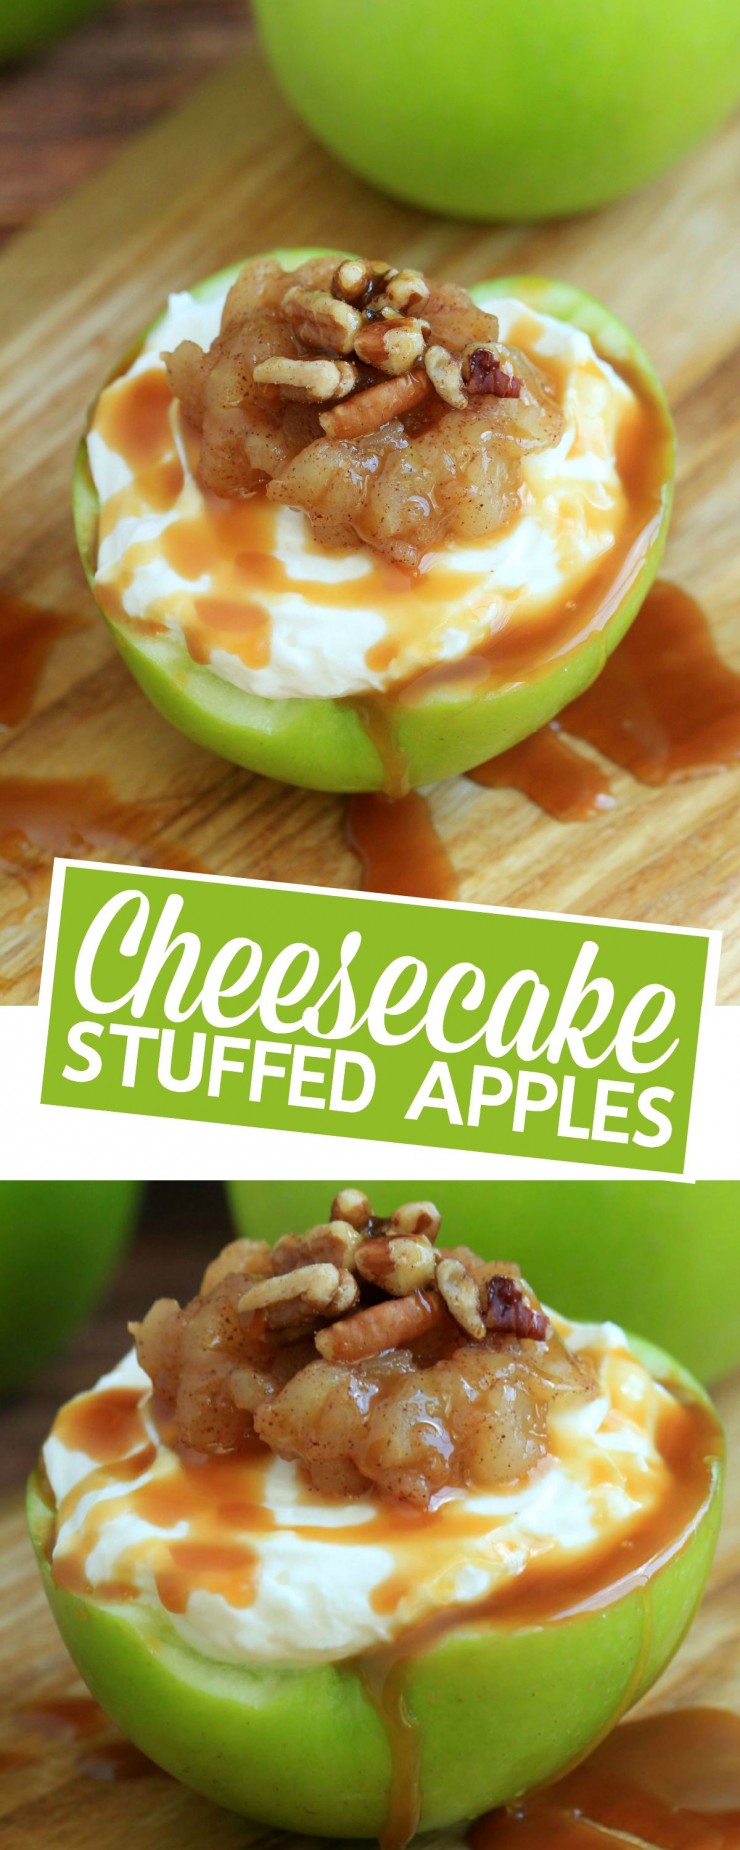 This Cheesecake Stuffed Apples Recipe is a decadent dessert full of bursts of fresh flavour!